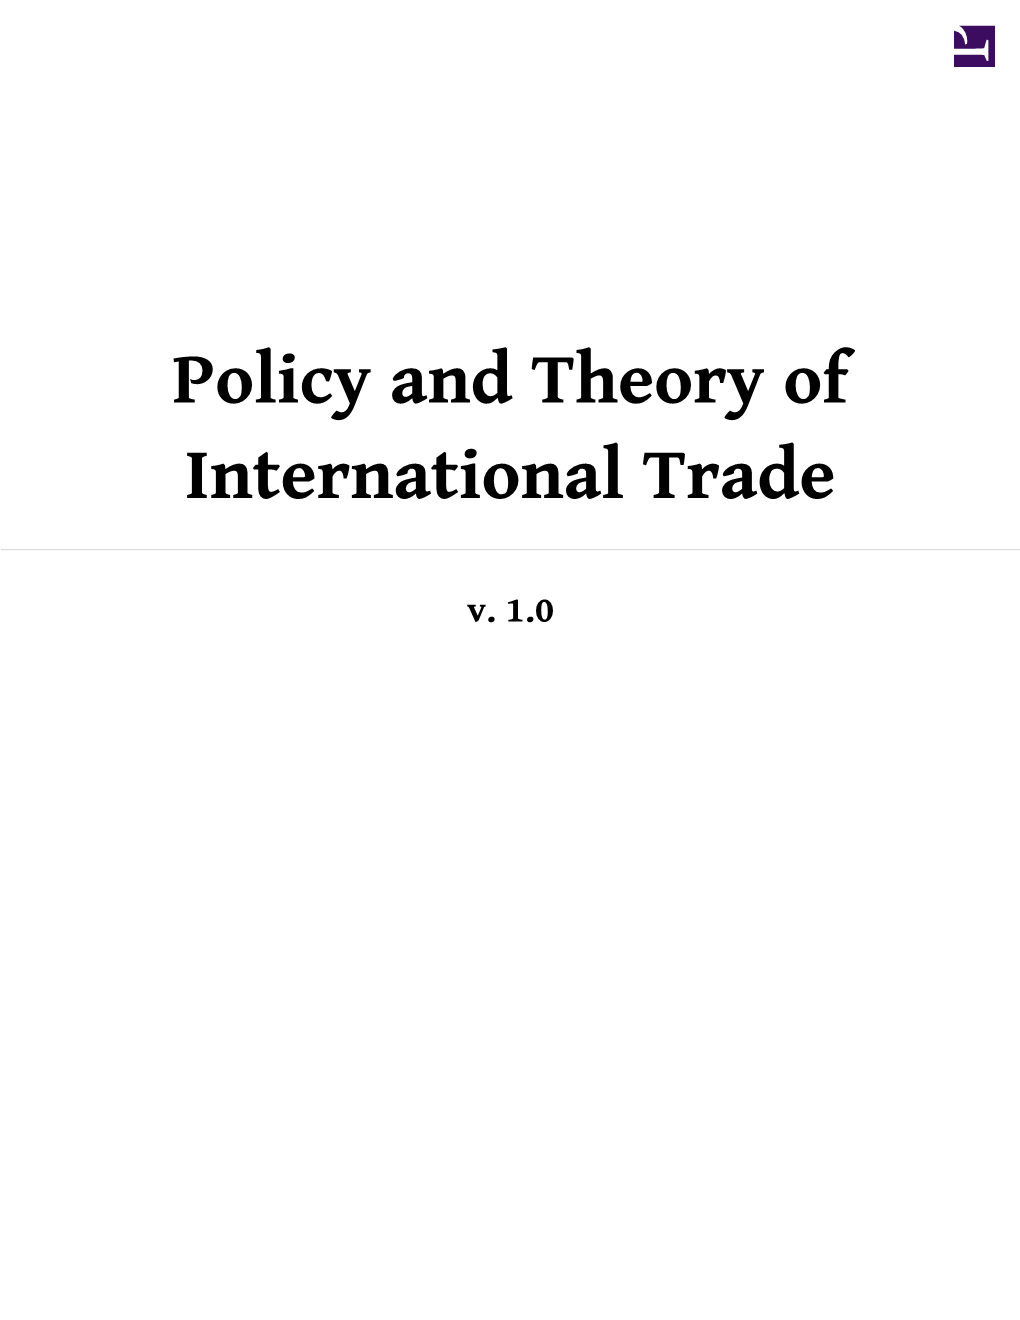 Policy and Theory of International Trade